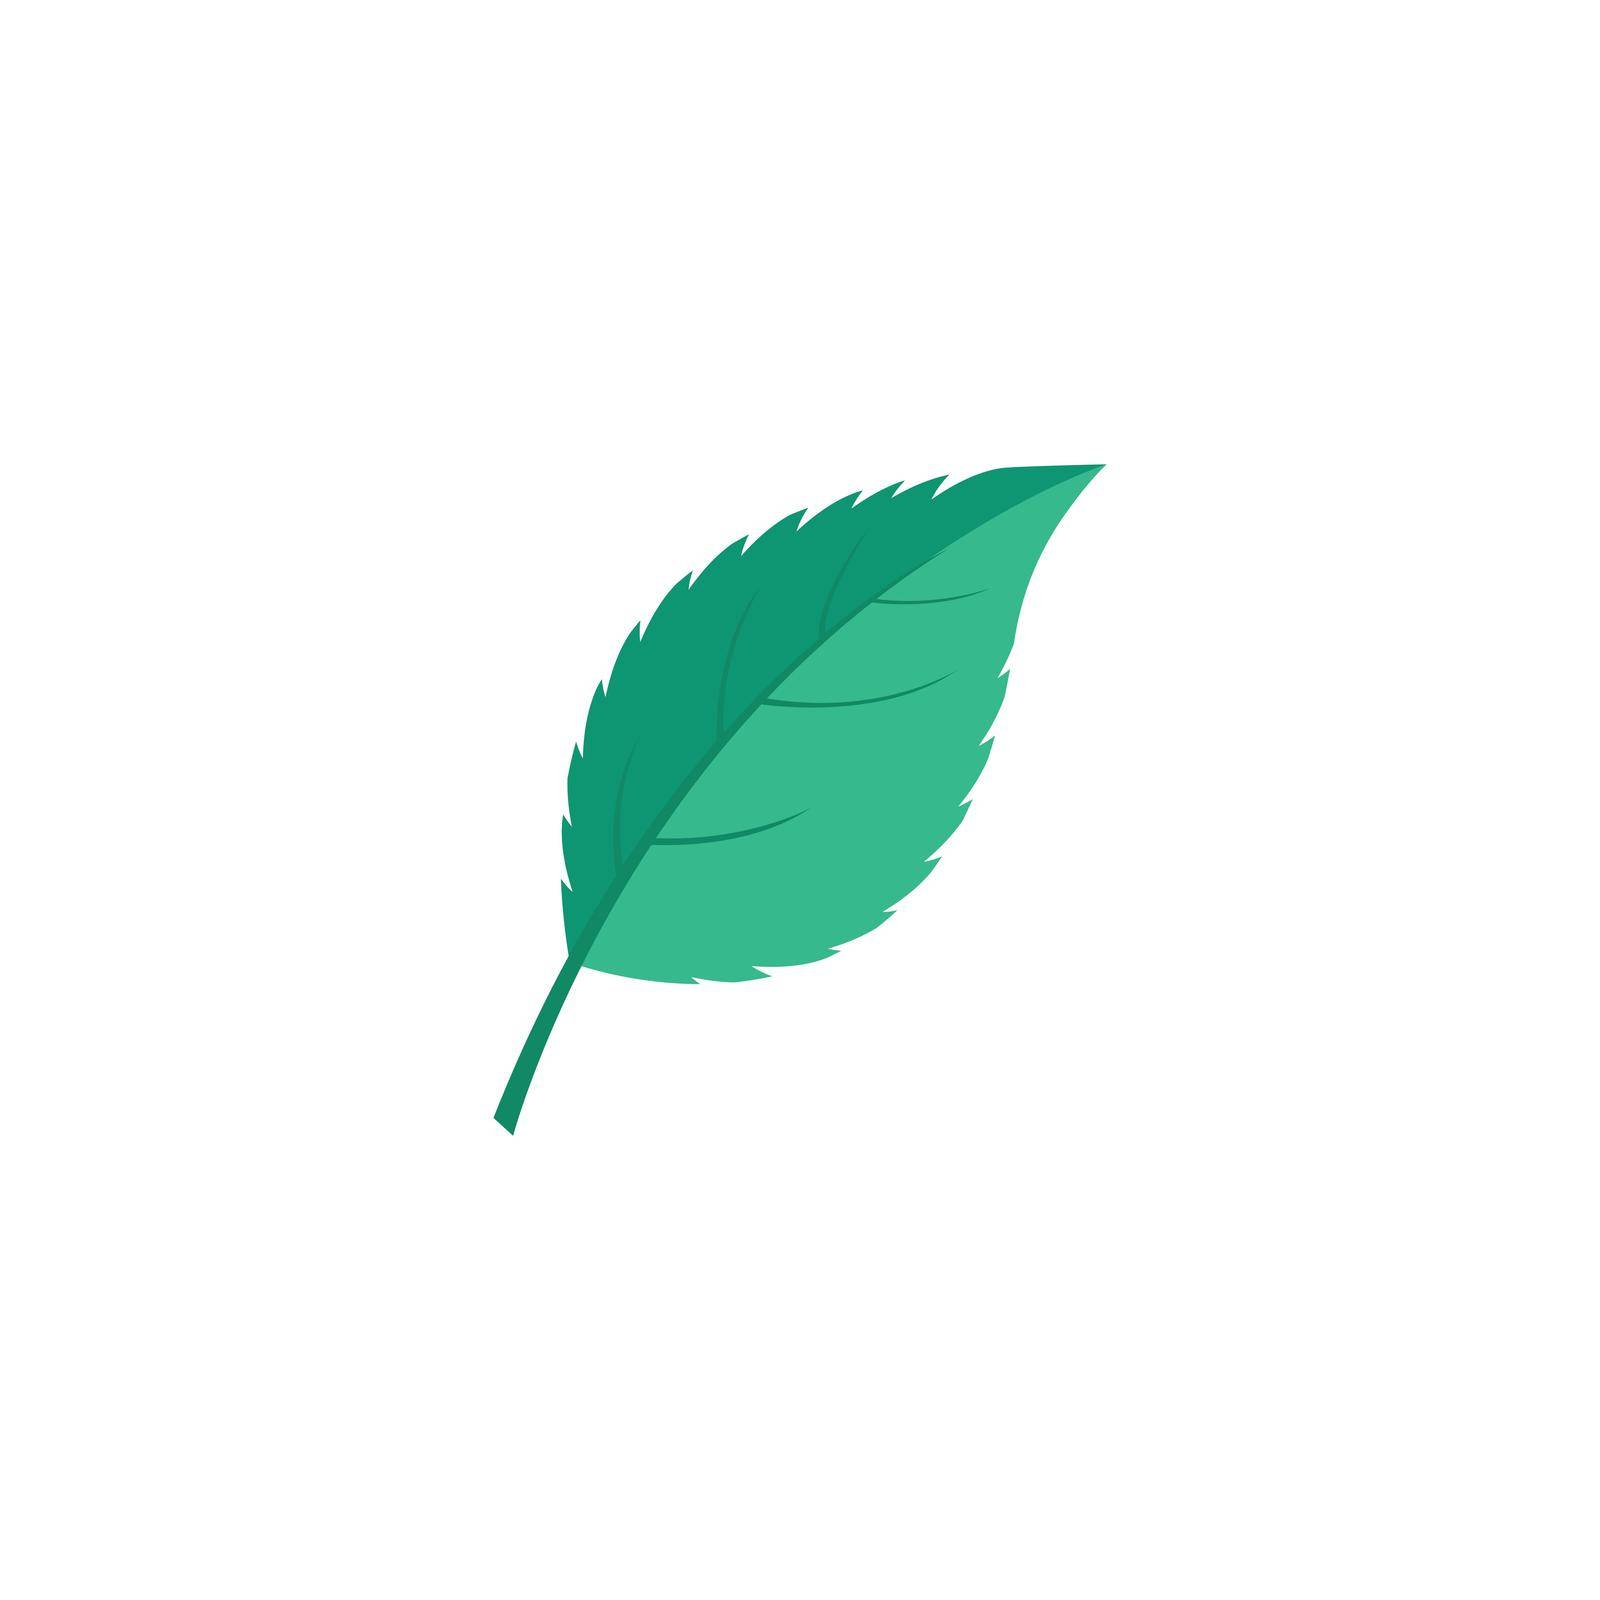 Leaf Mint Logo Template vector symbol by Redgraphic